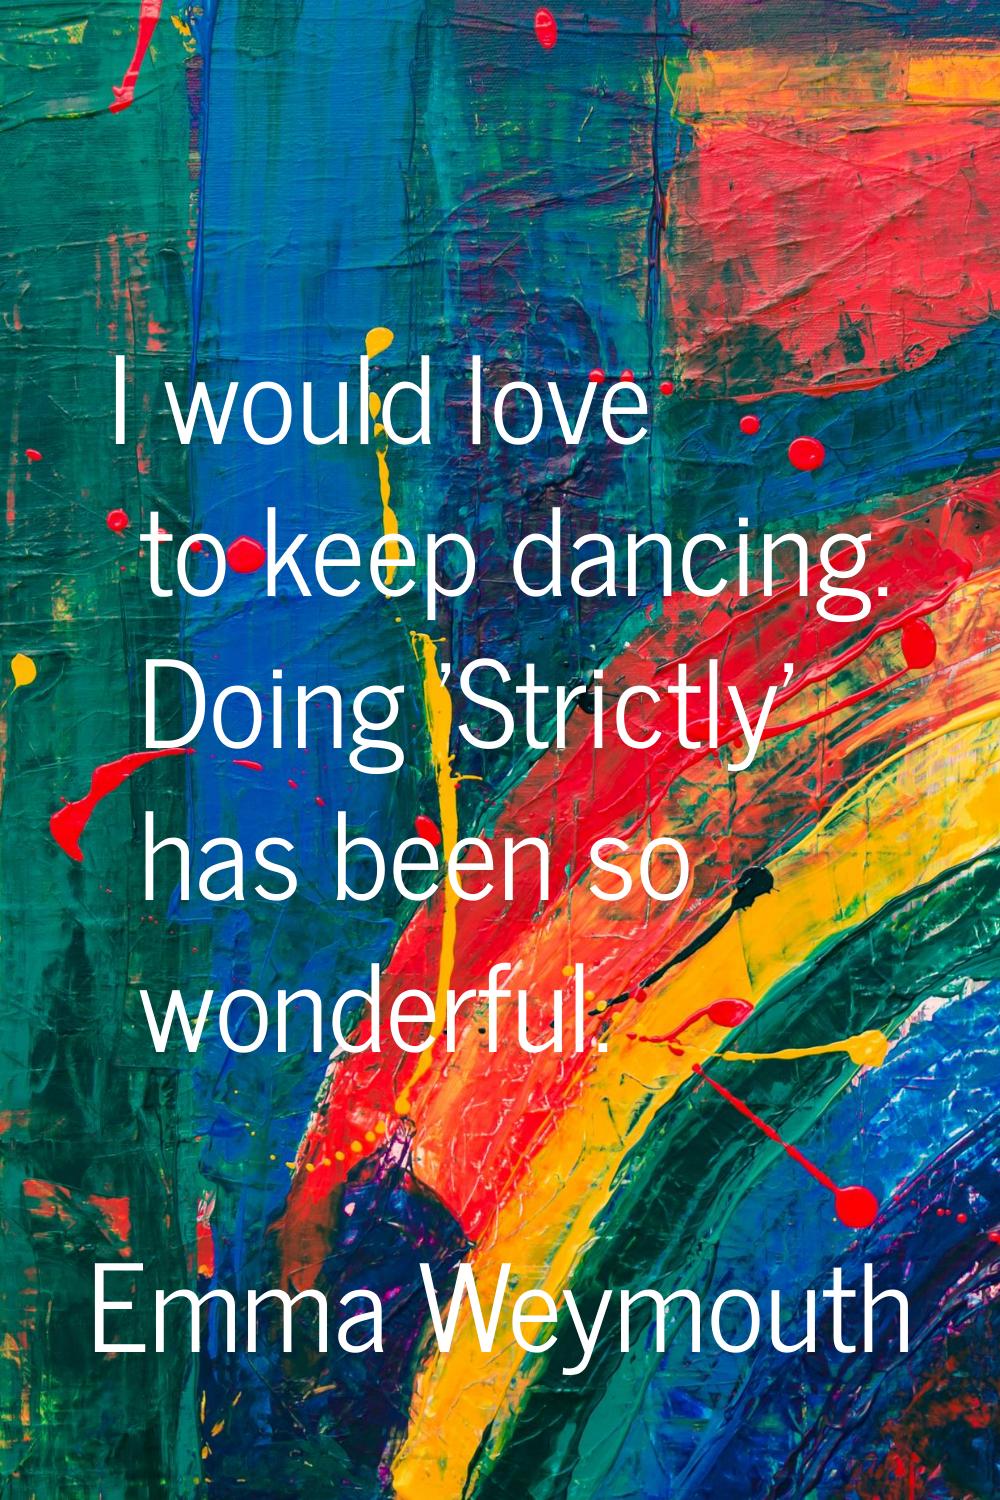 I would love to keep dancing. Doing 'Strictly' has been so wonderful.